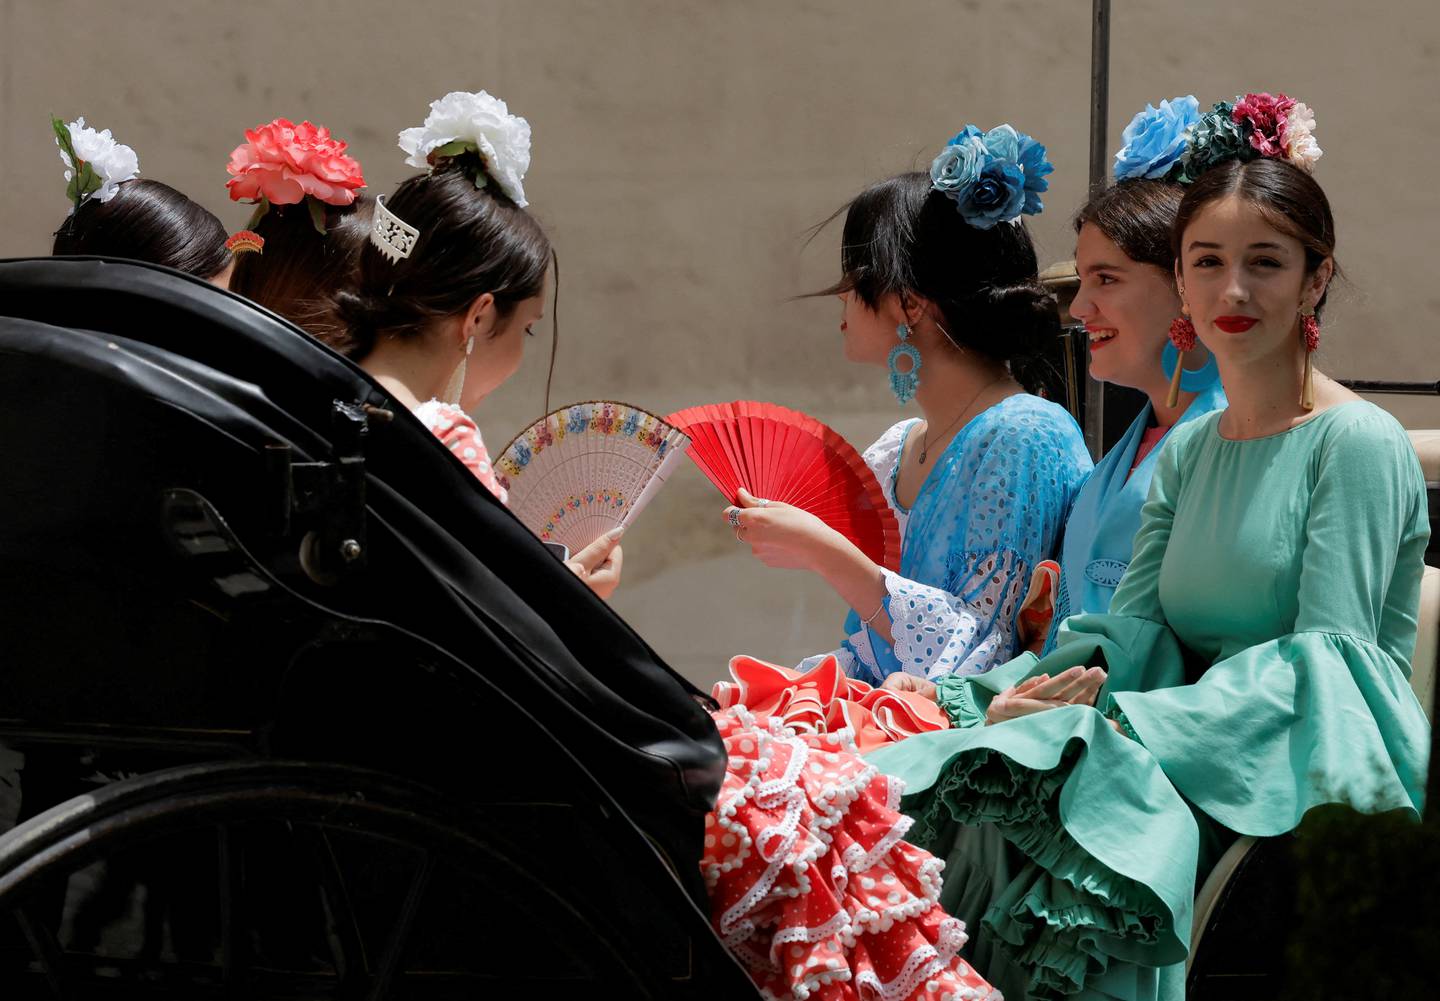 Women wearing traditional sevillana dresses use fans to cool off as they sit on a horse-drawn carriage in Cordoba, Spain, on May 21, 2022.  Reuters